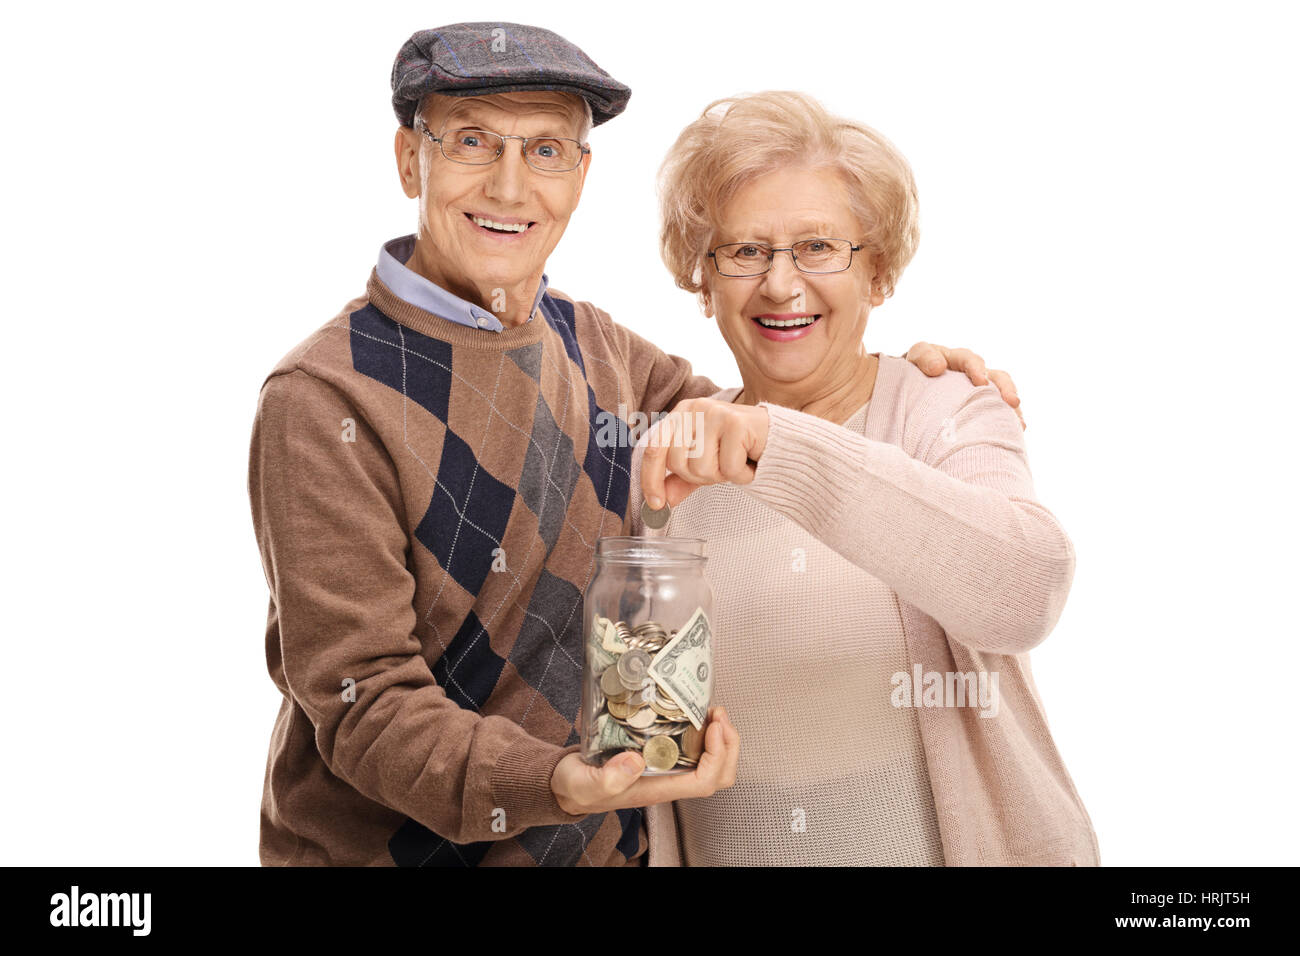 Elderly man holding a money jar with an elderly woman putting a coin in it isolated on white background Stock Photo